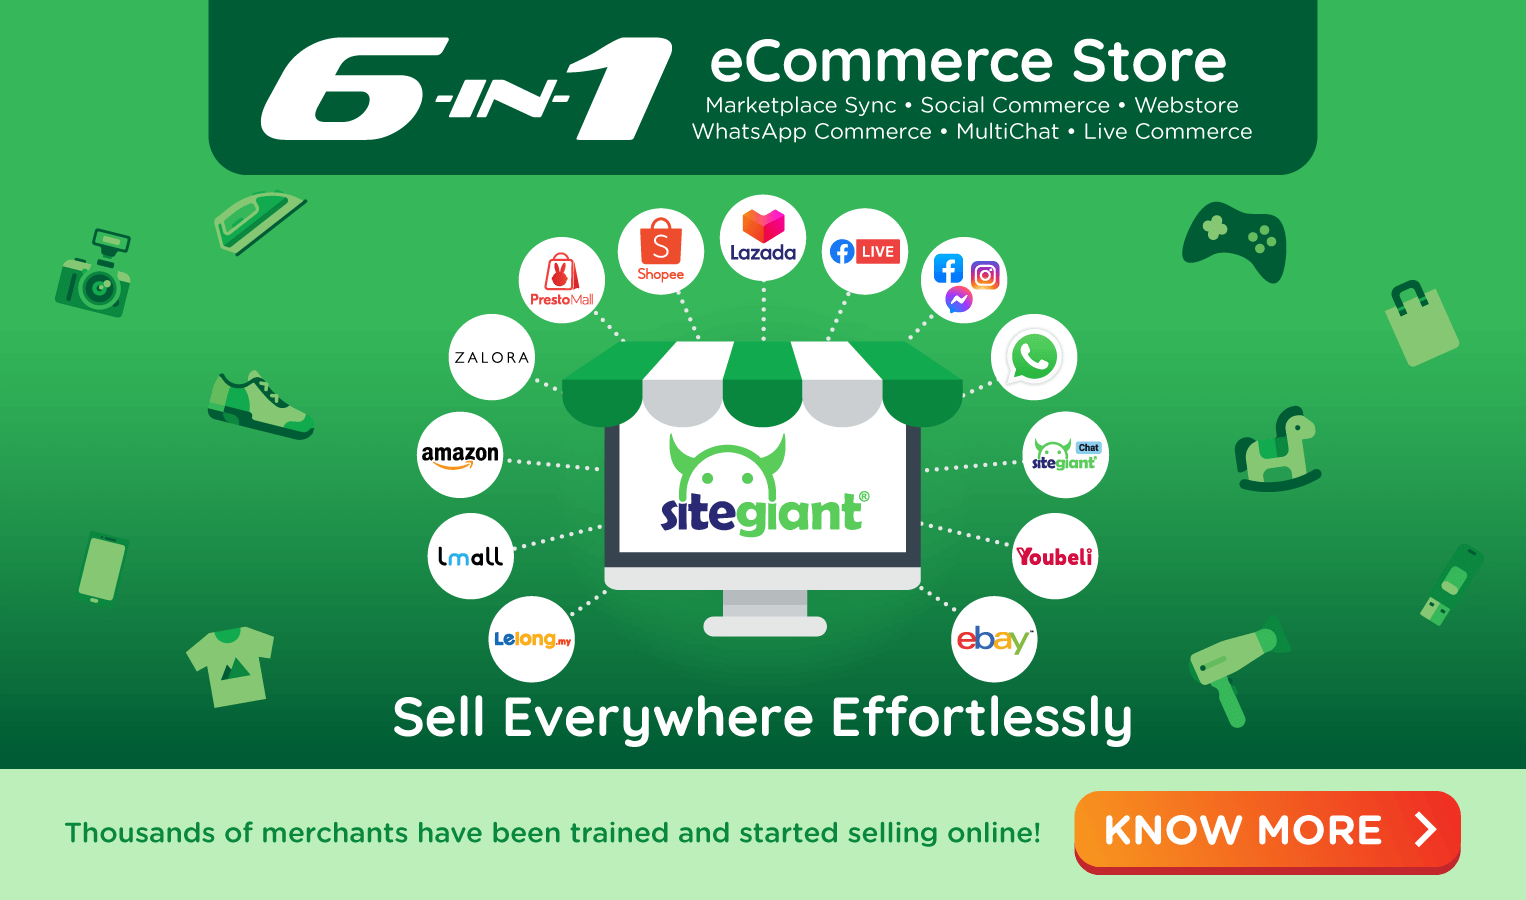 6 in 1 eCommerce Solution